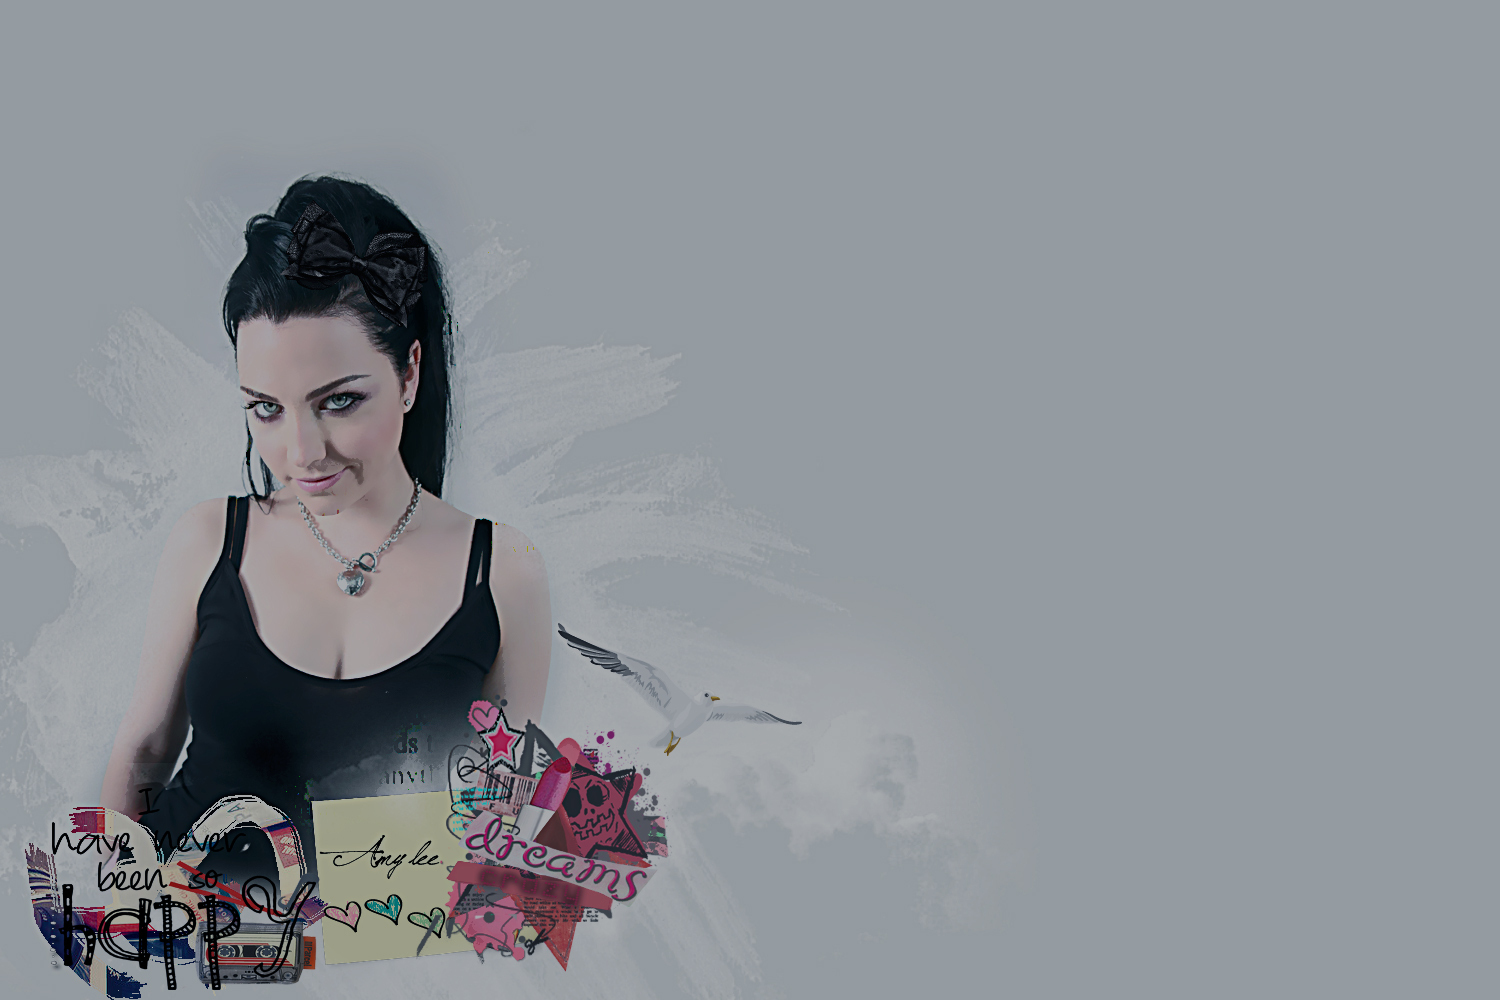 Amy Lee Images on Fanpop.